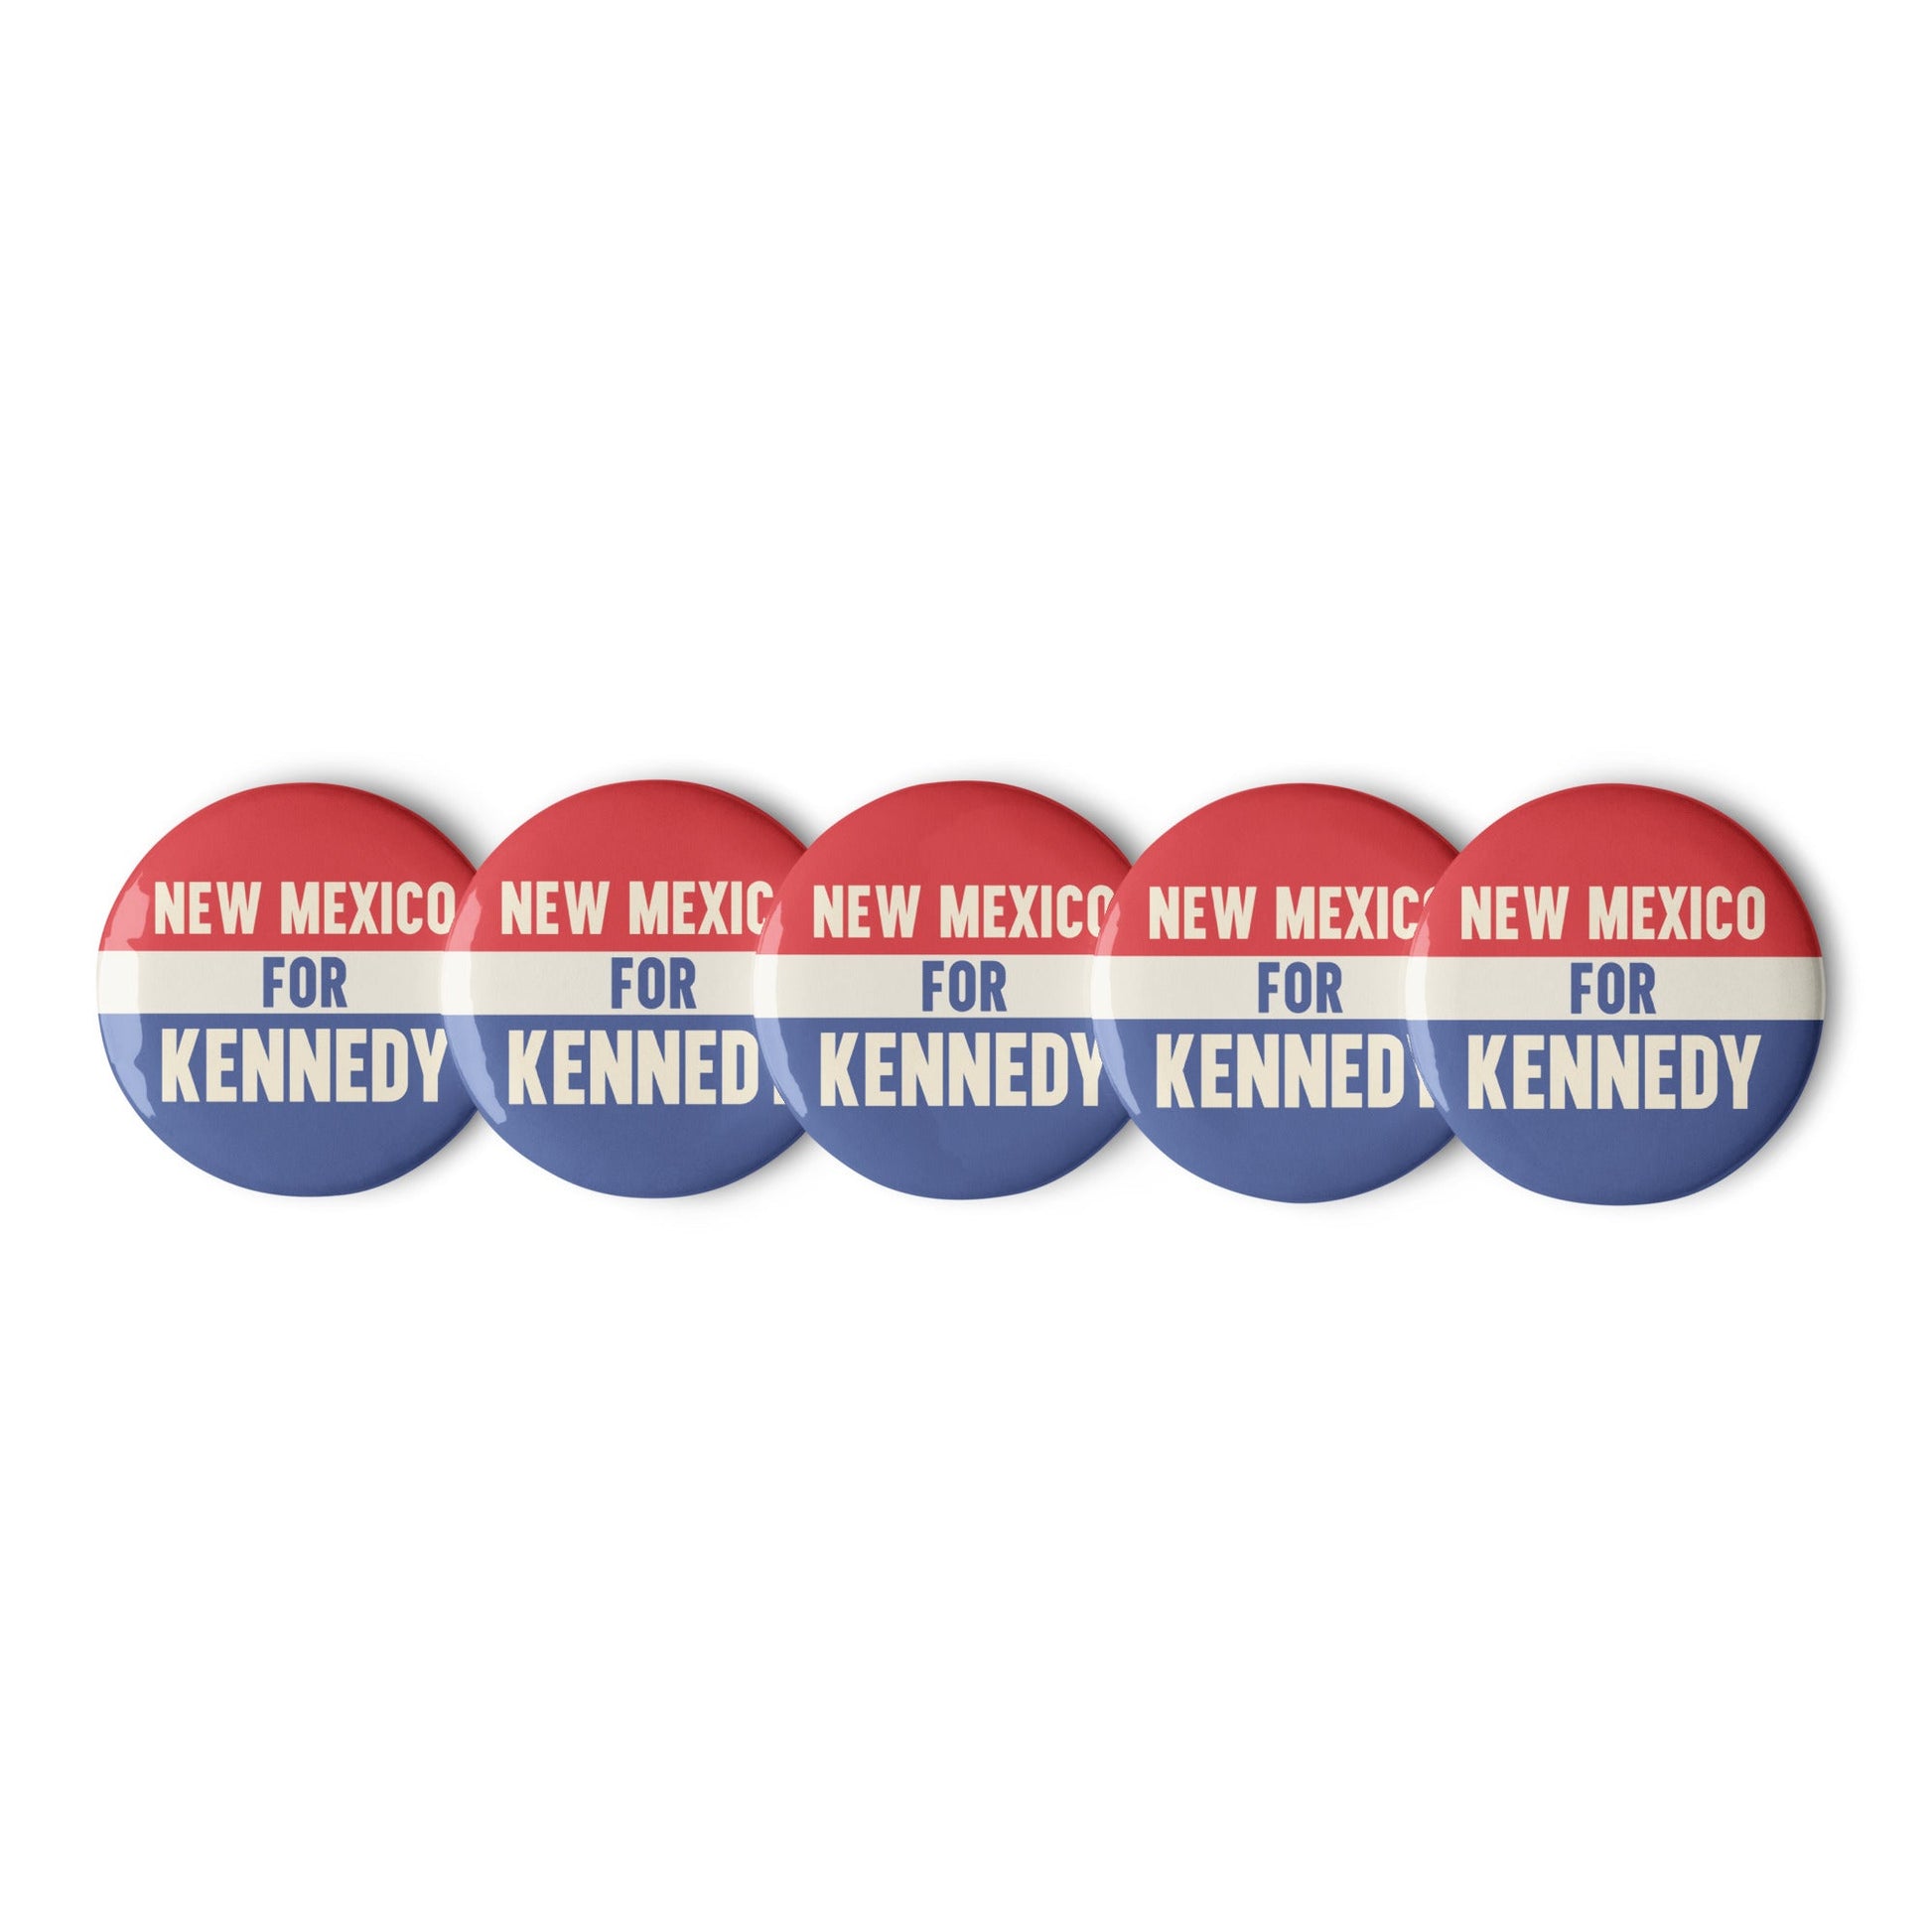 New Mexico for Kennedy (5 Buttons) - TEAM KENNEDY. All rights reserved